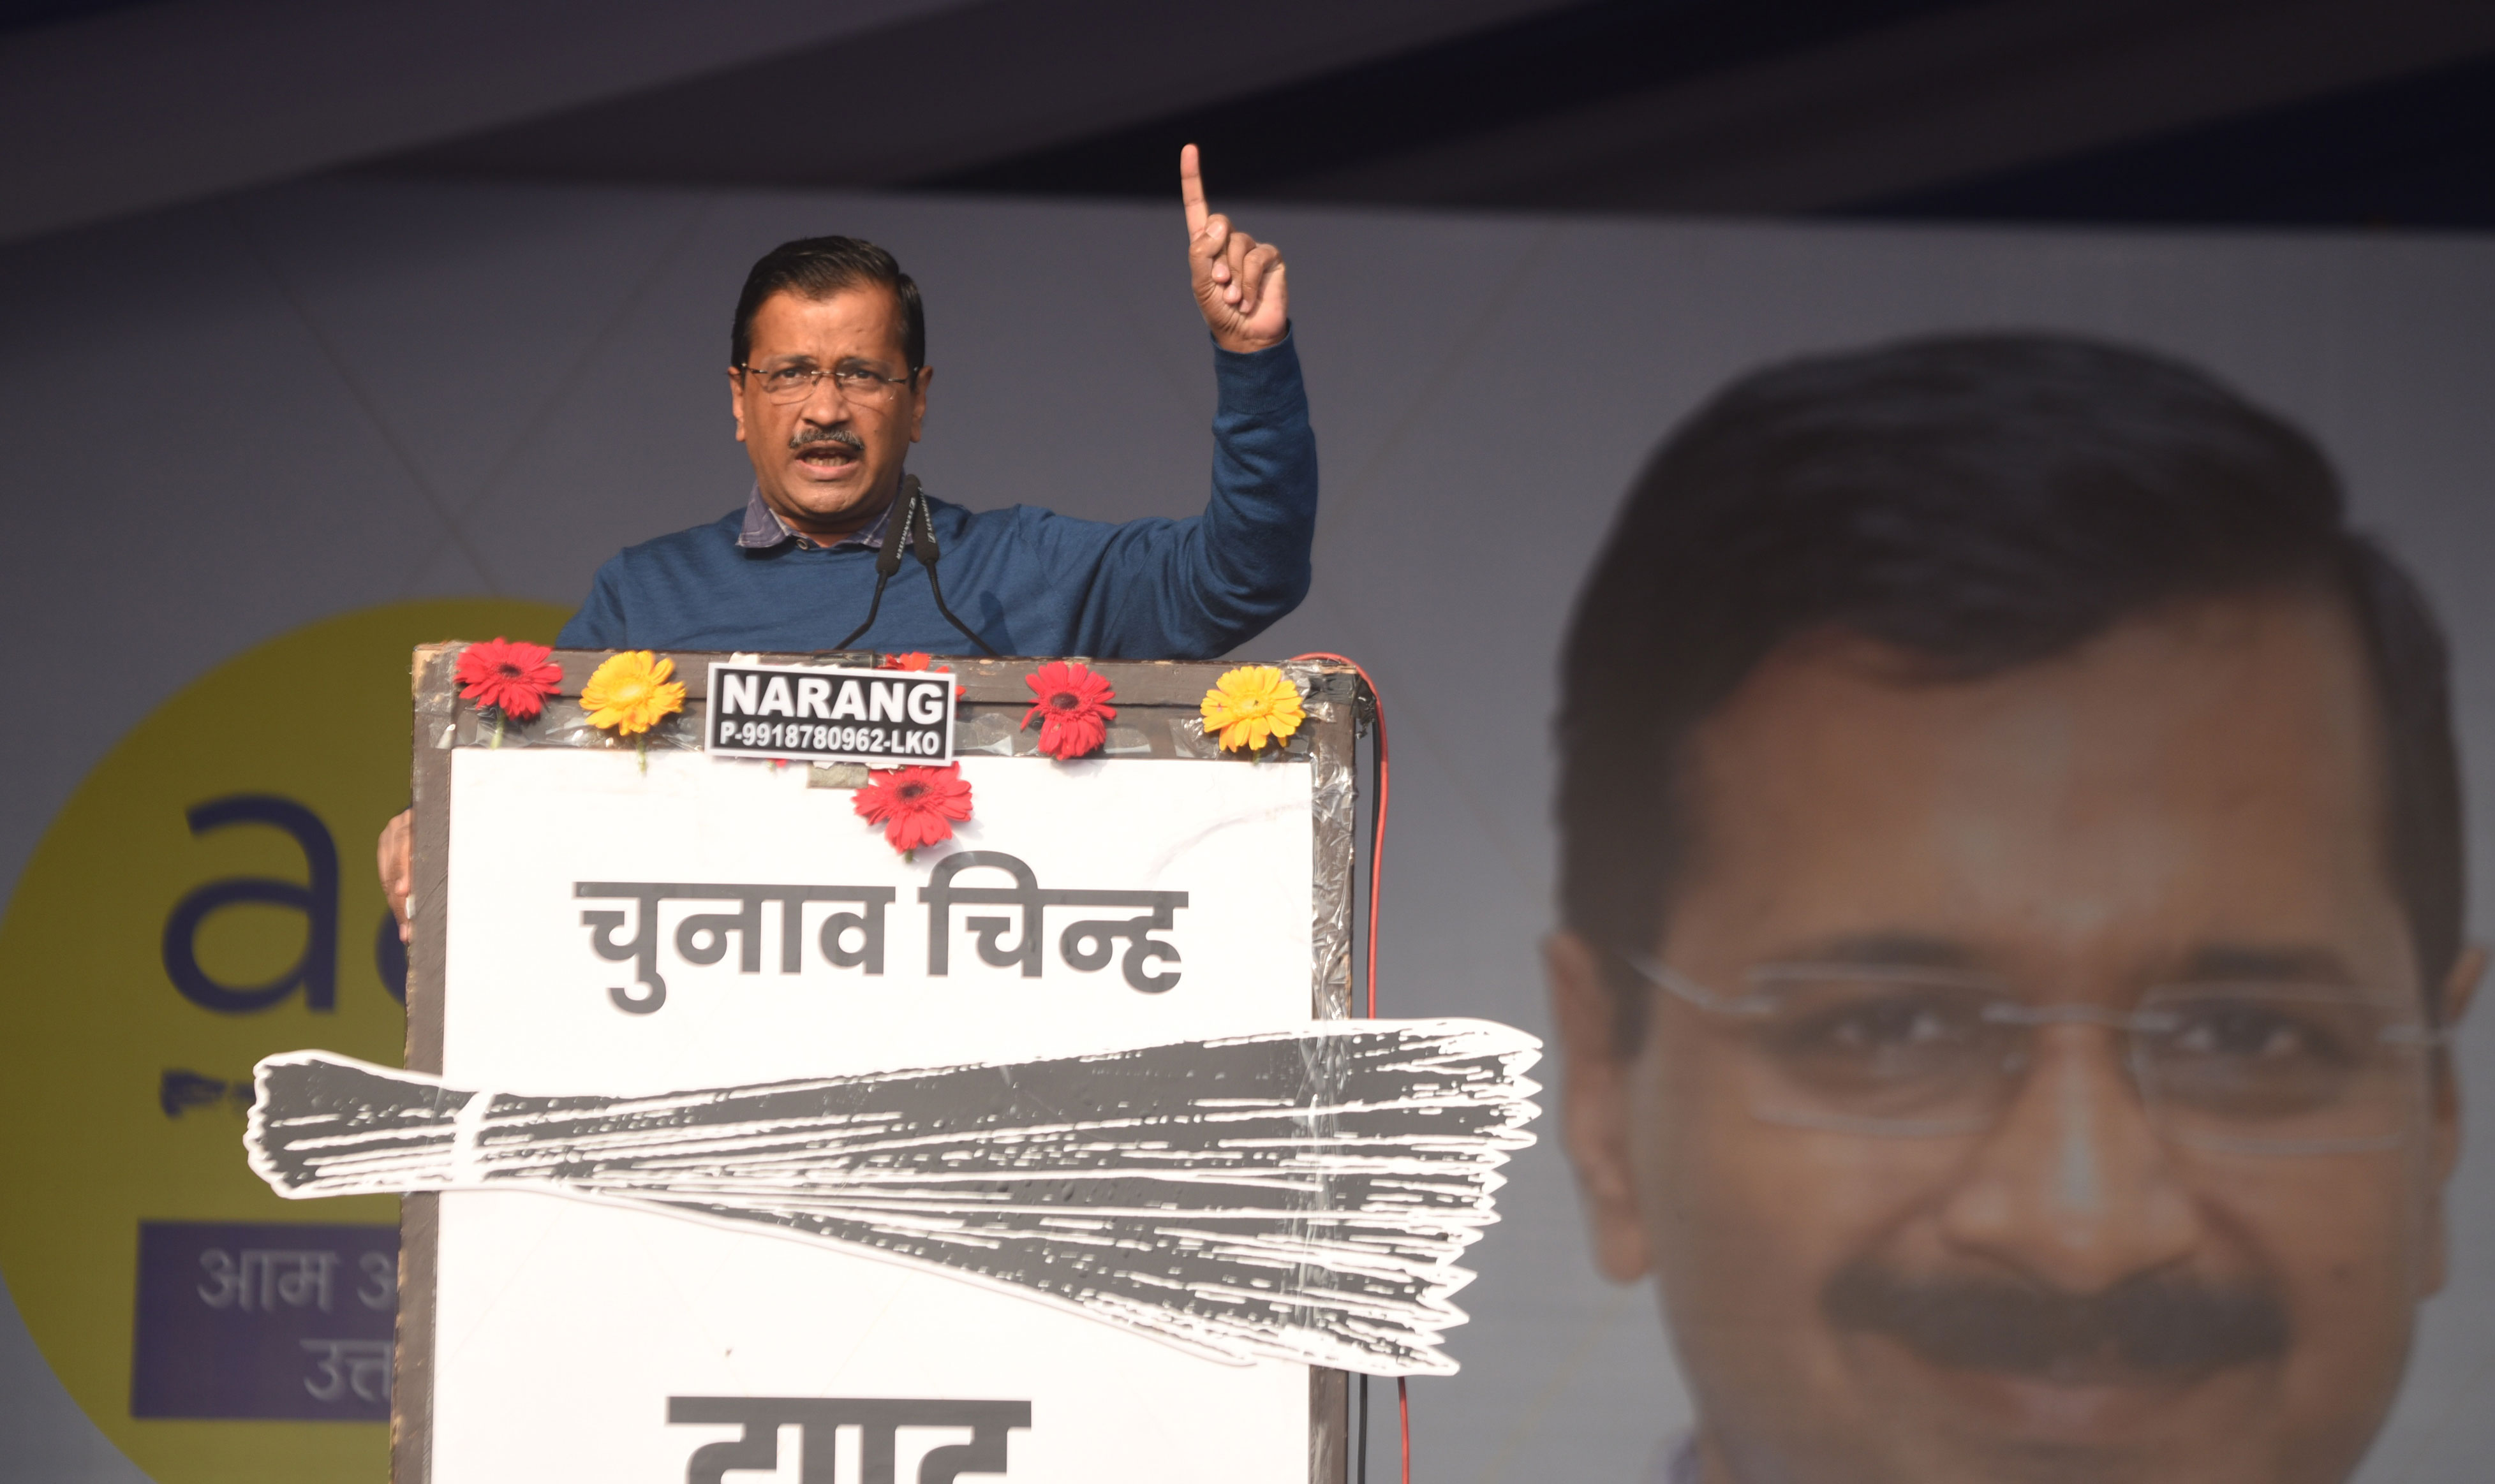 Delhi Chief Minister Arvind Kejriwal addresses the crowd at an Aam Aadmi Party Maha Rally, on January 2, in Lucknow, India.